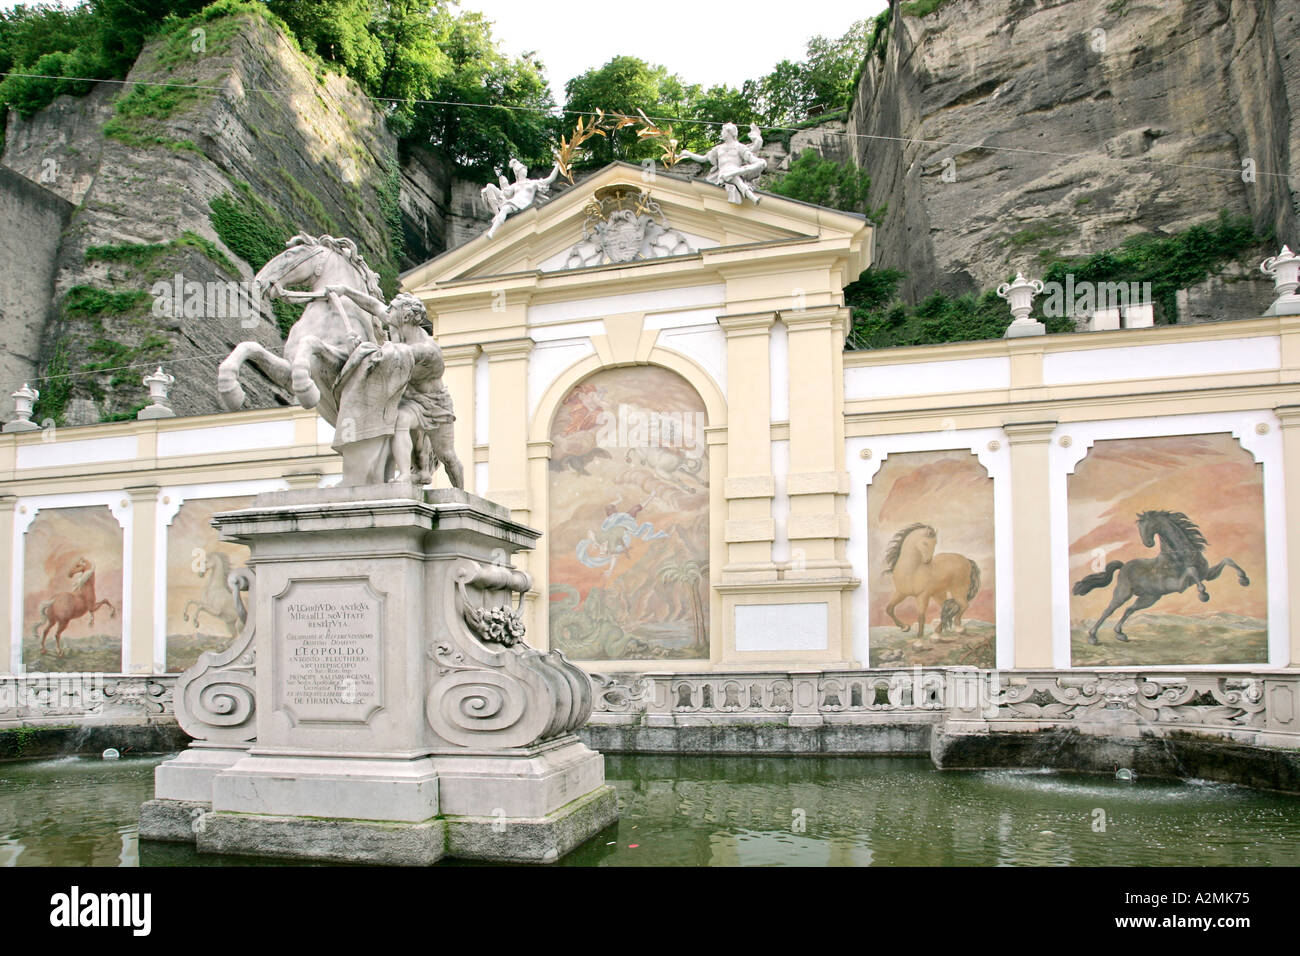 this watering place for horses was built in the end of the 17 century town of Salzburg Austria Stock Photo